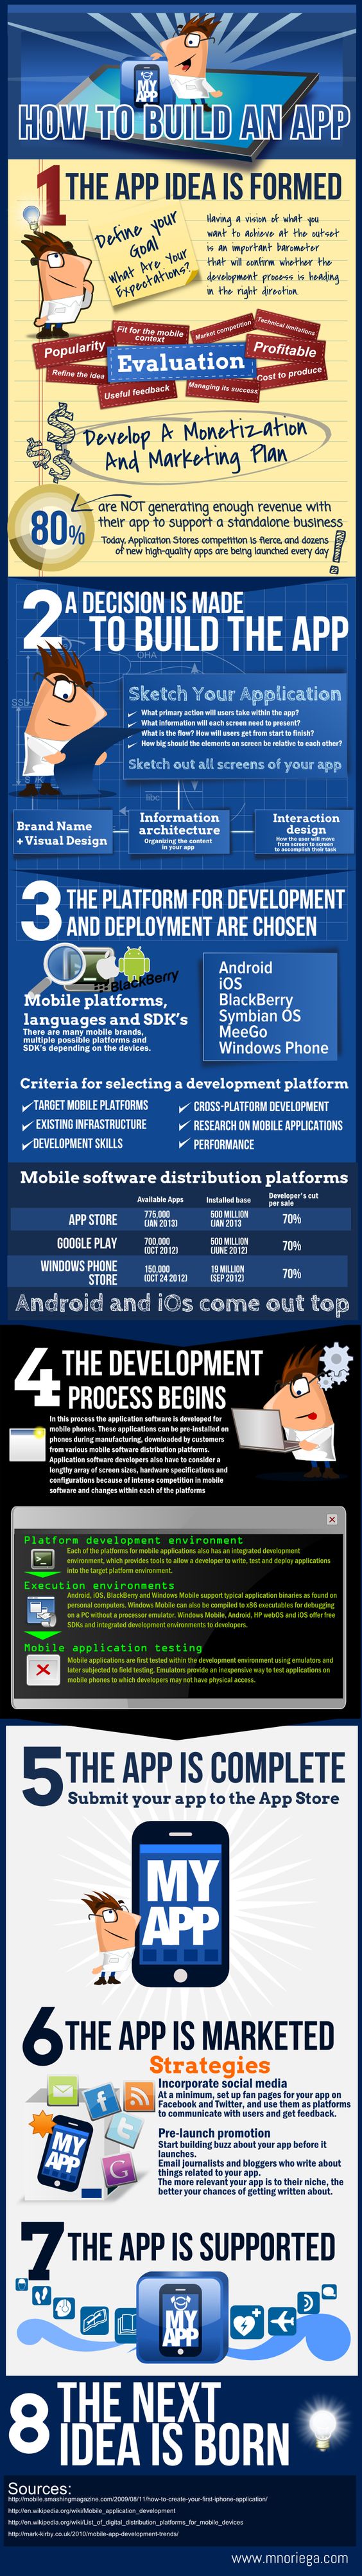 This infographic shows in a wide perspective how to develop an app, from the idea till development and marketing.